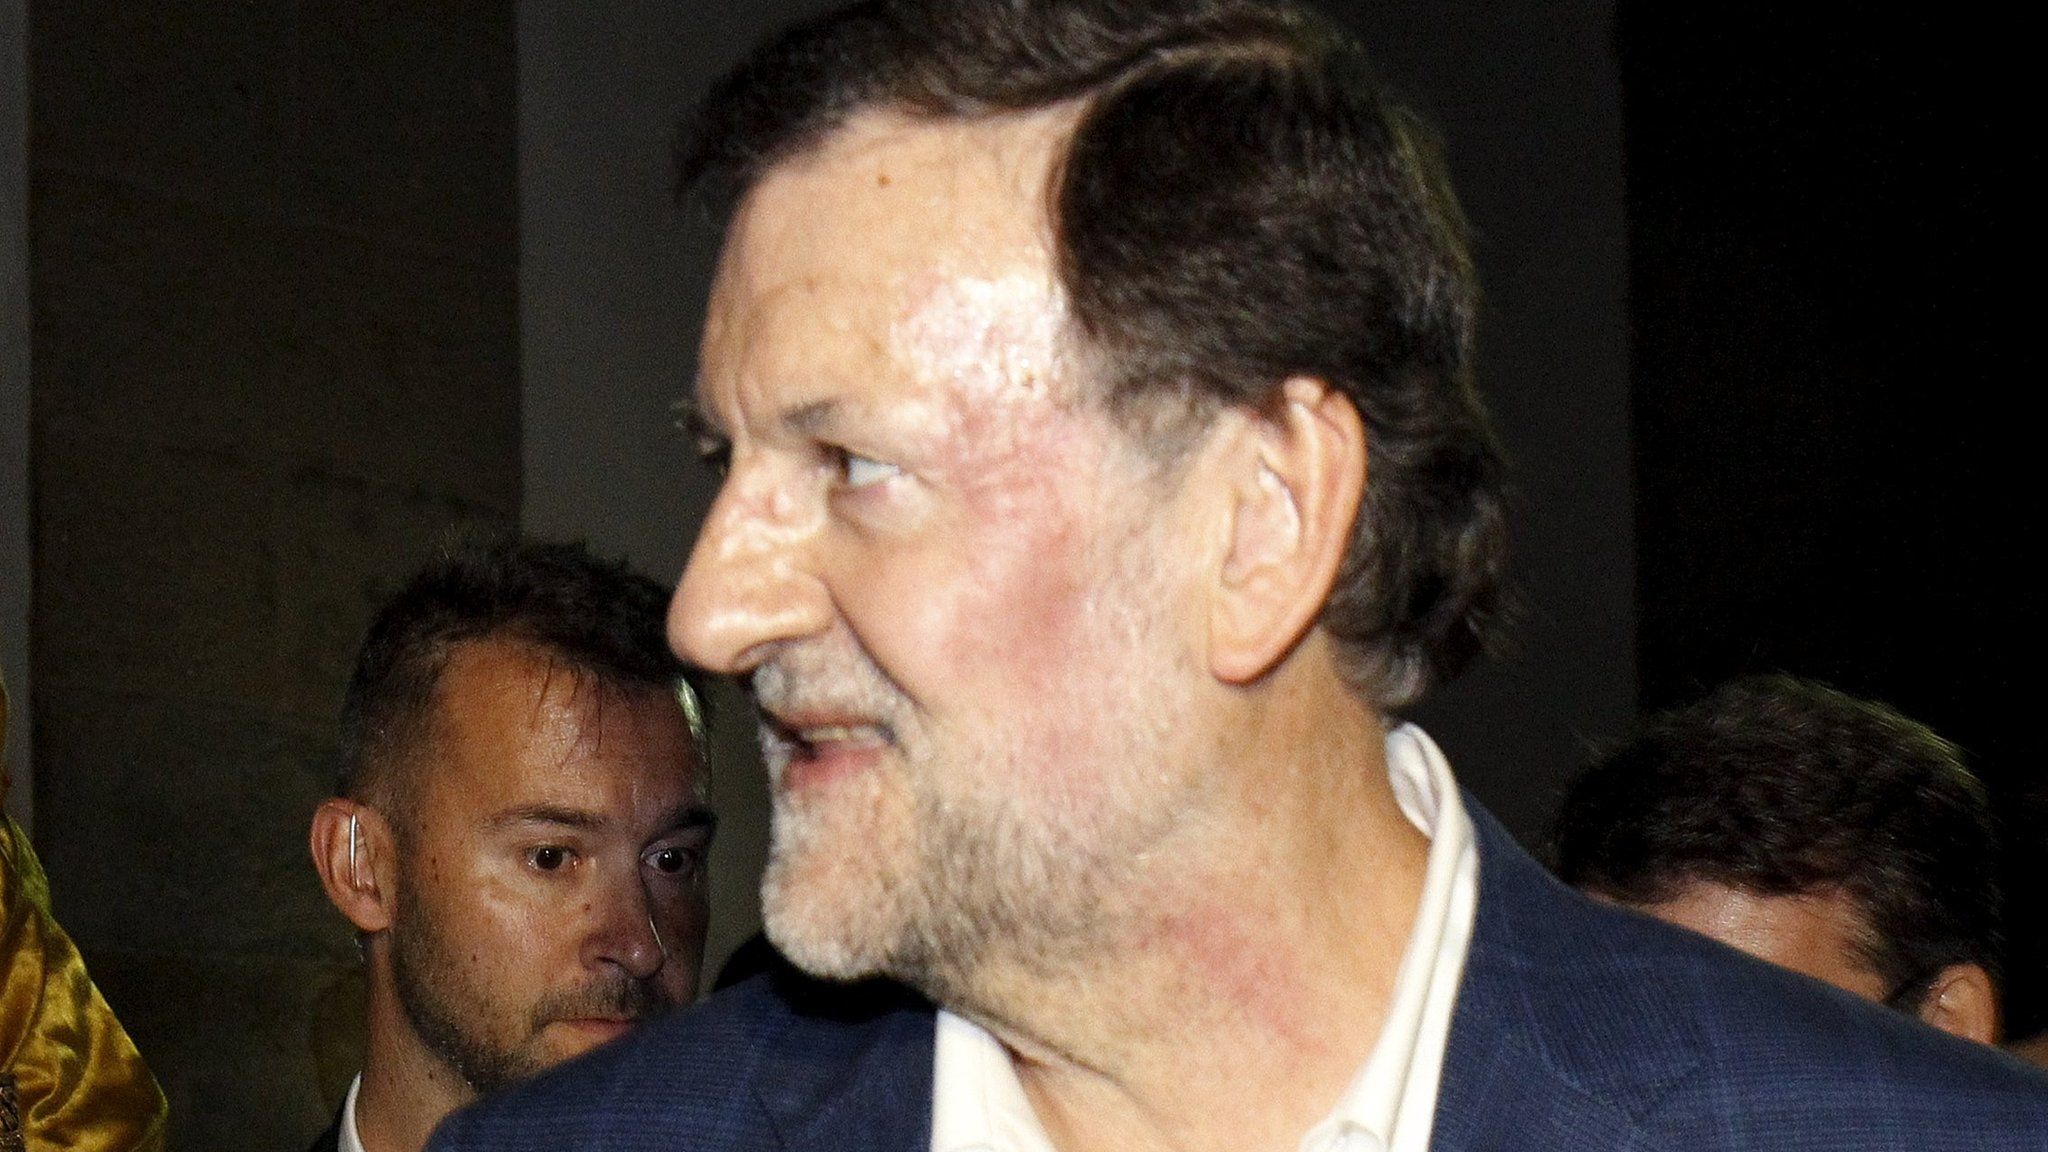 A deep red mark is seen on Spanish Prime Minister Mariano Rajoy's face after he was punched by a young man in Pontevedra (16 December 2015)